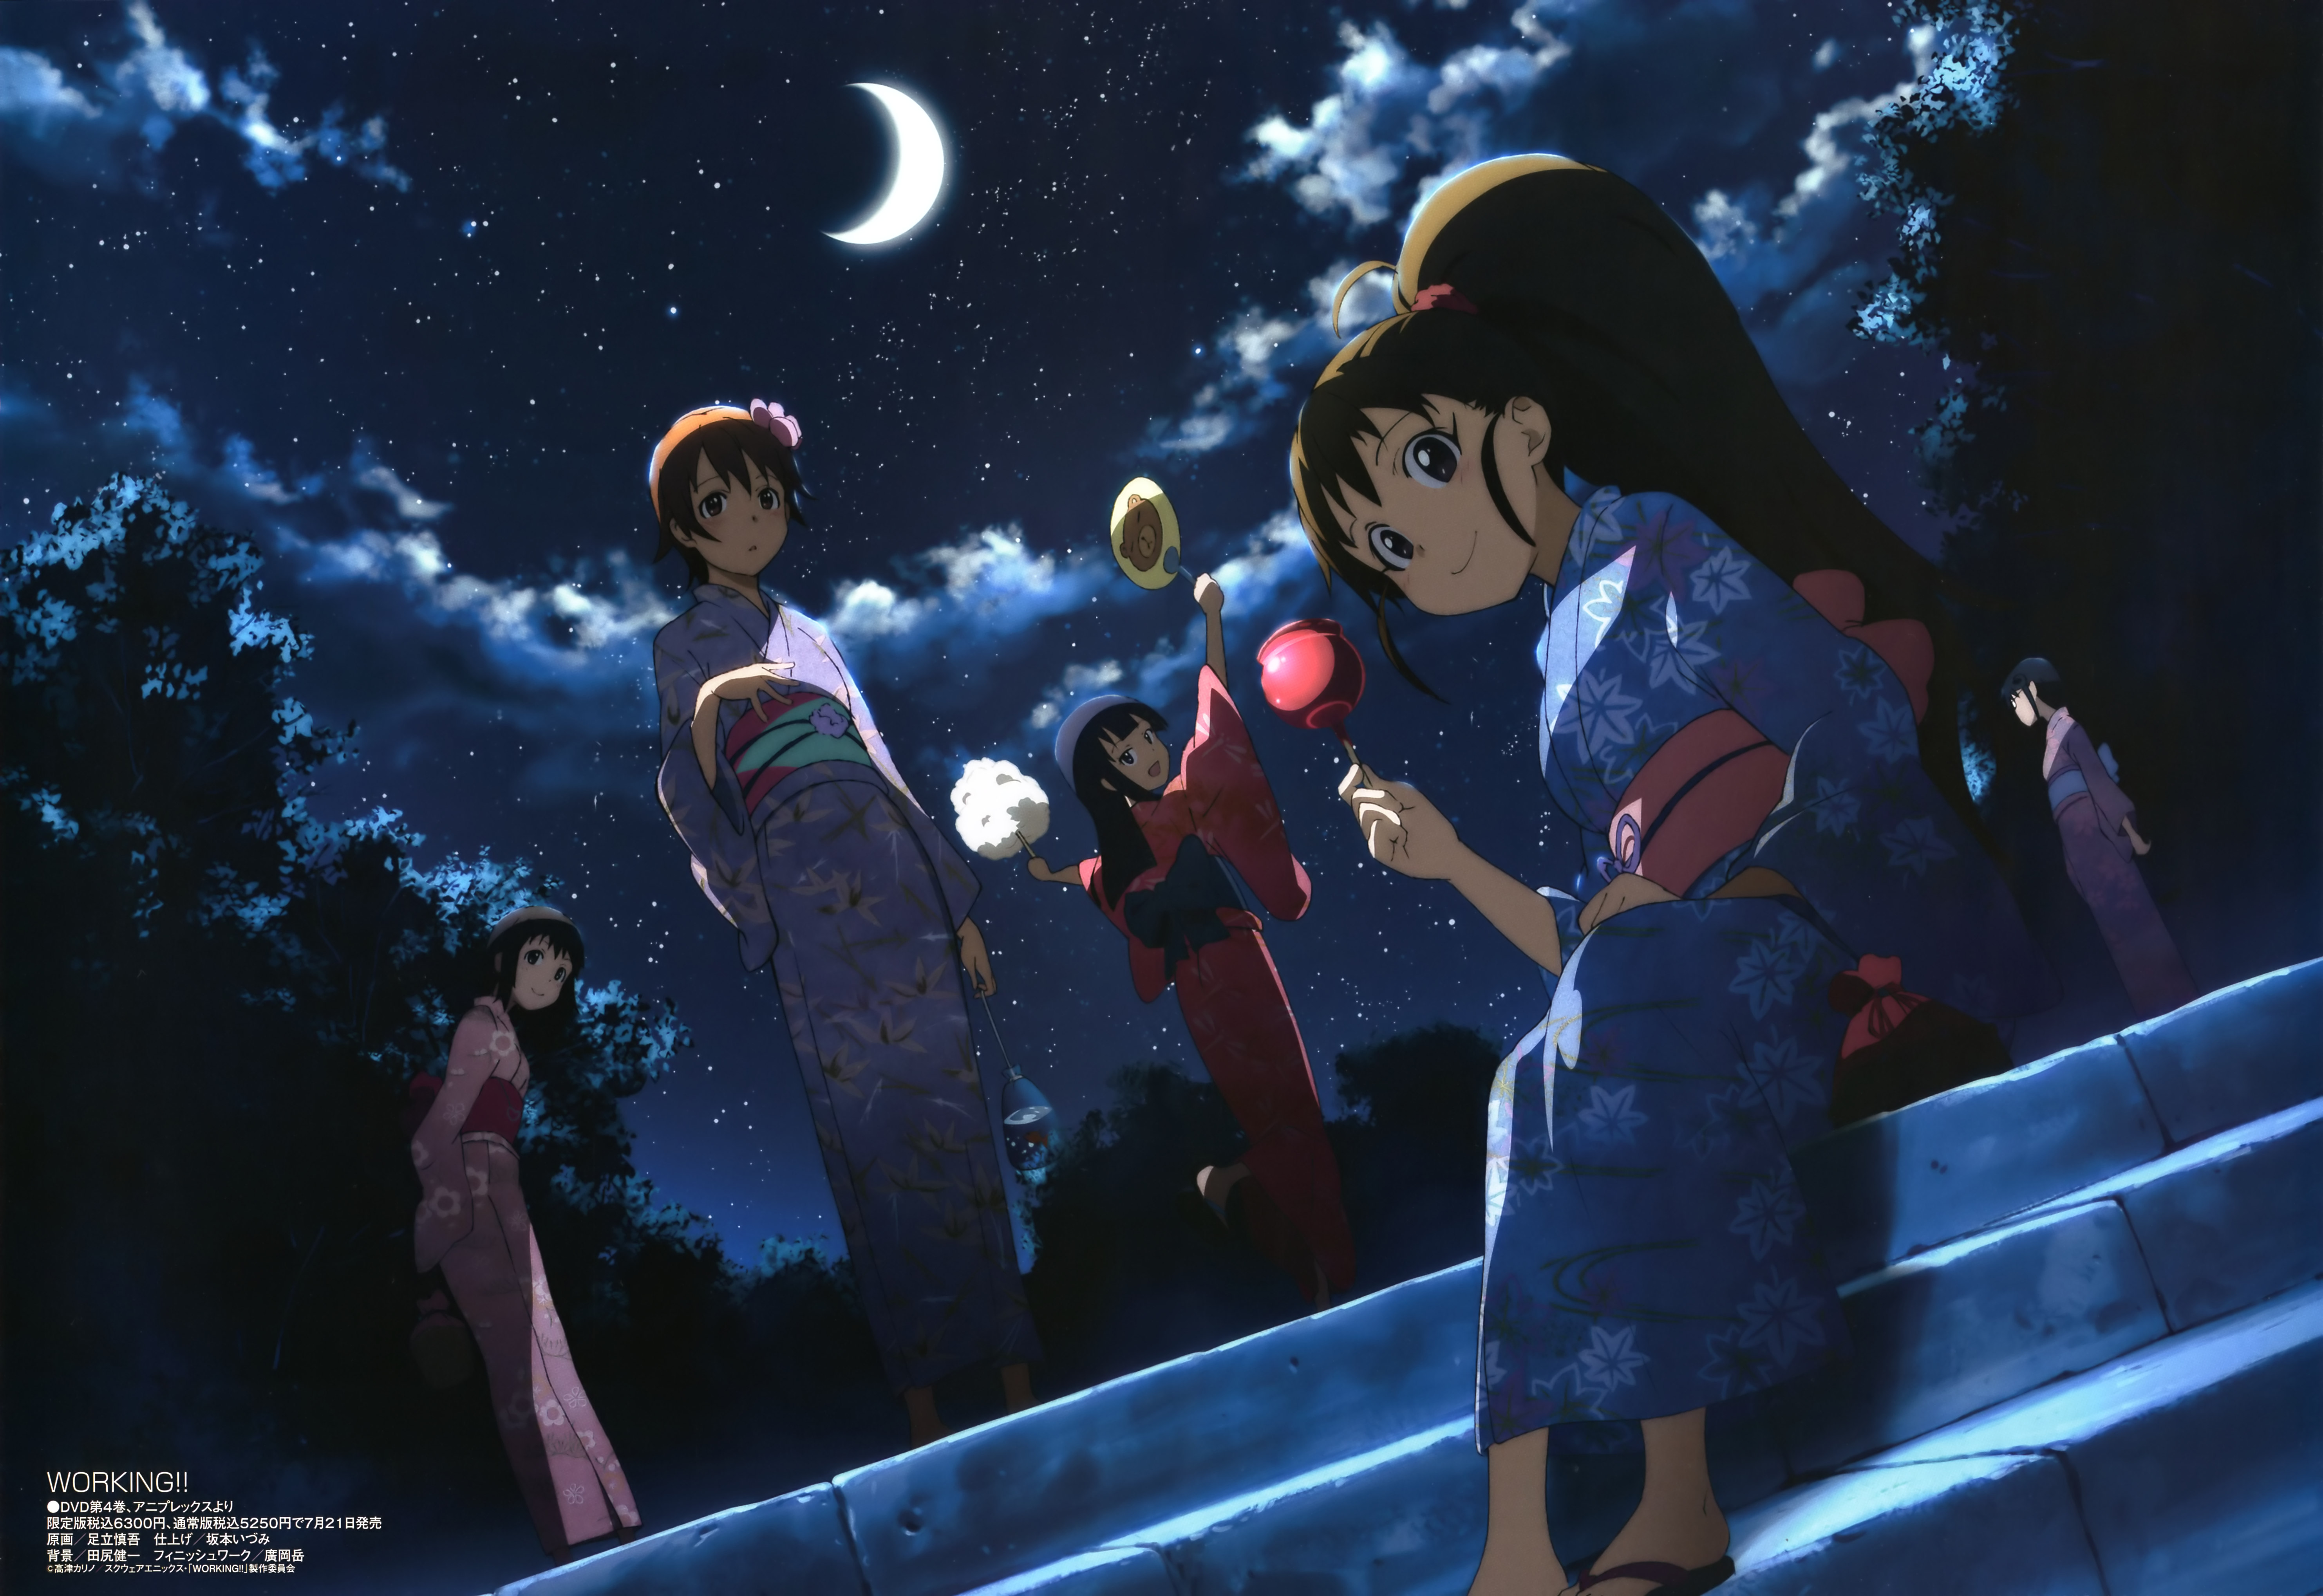 Anime characters in yukatas under a starry sky.